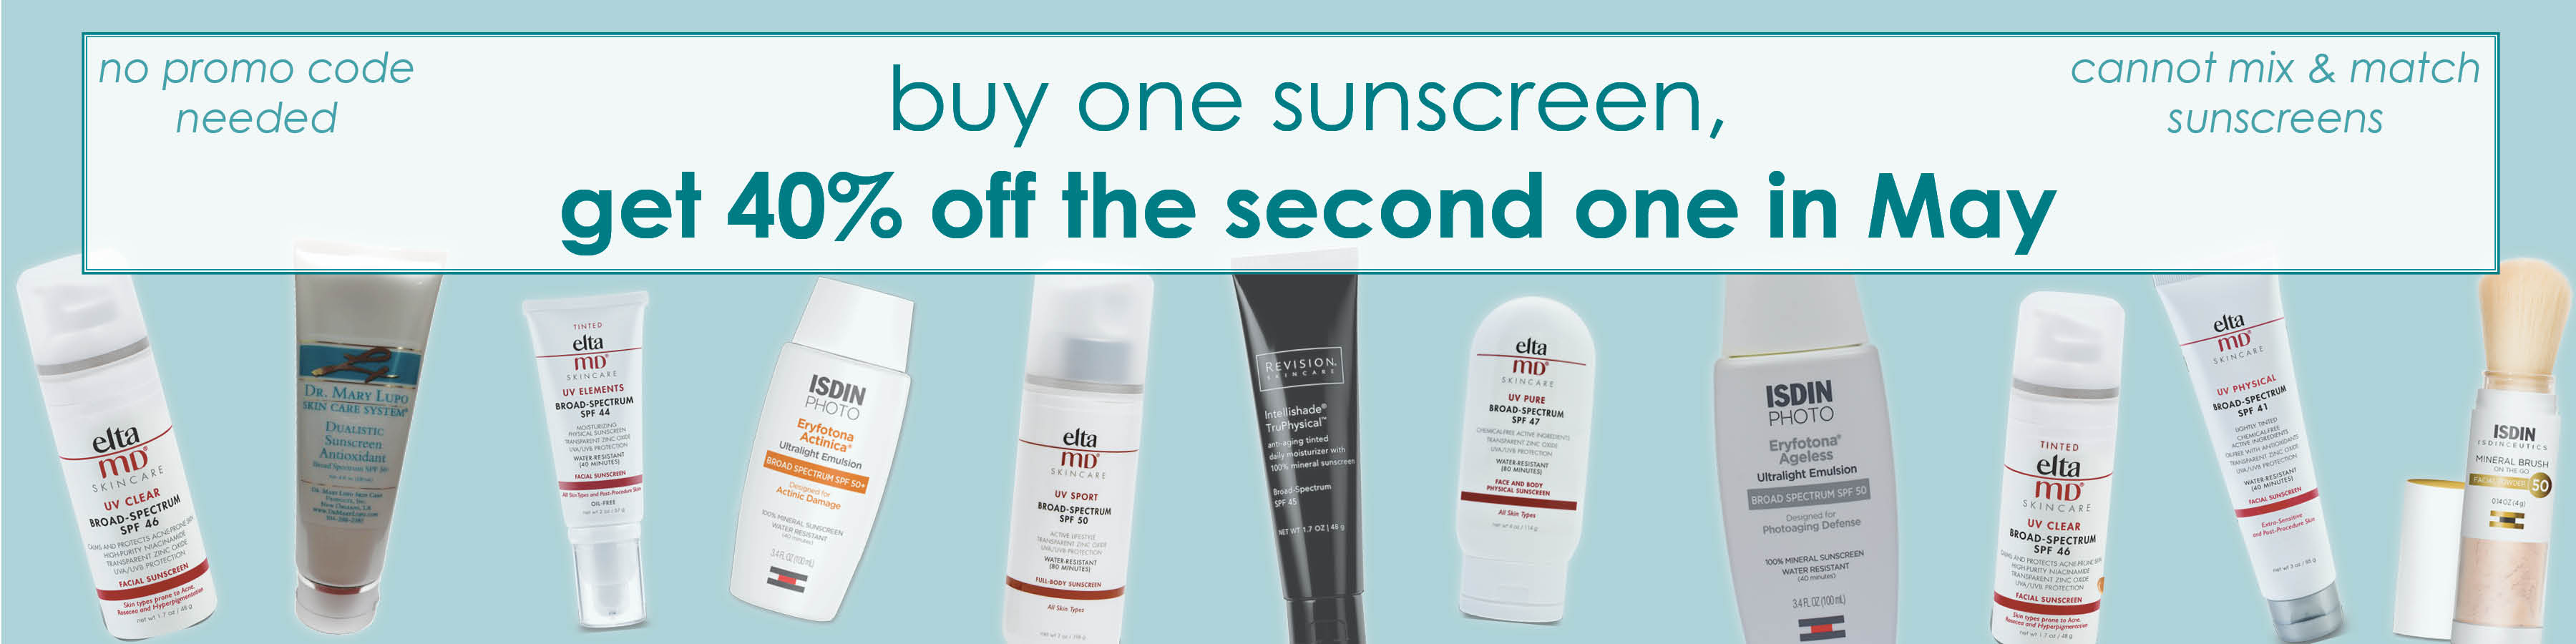 Buy One sunscreen, get 40% off the second one